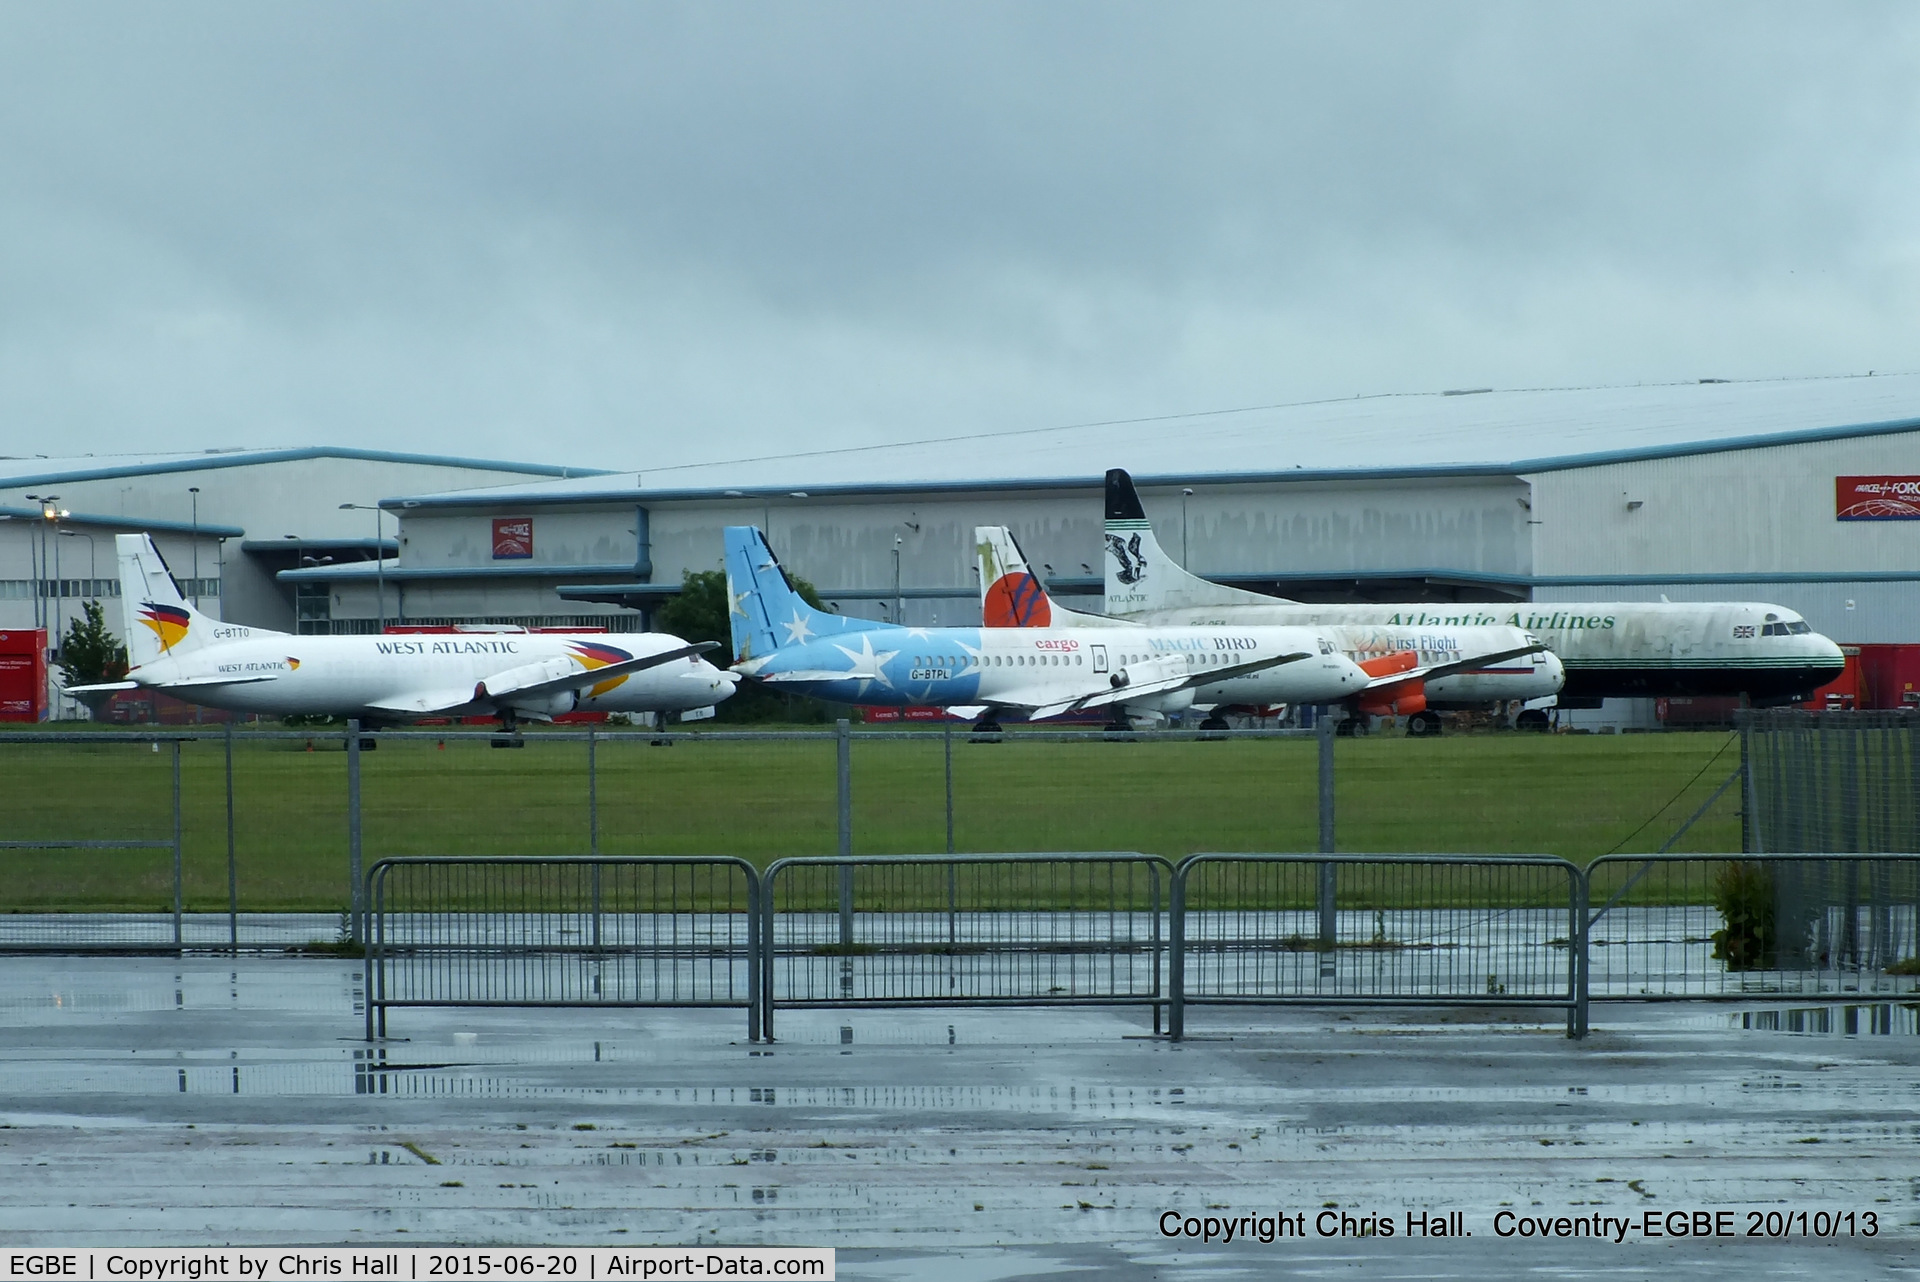 Coventry Airport, Coventry, England United Kingdom (EGBE) - BAe ATP's stored at Coventry